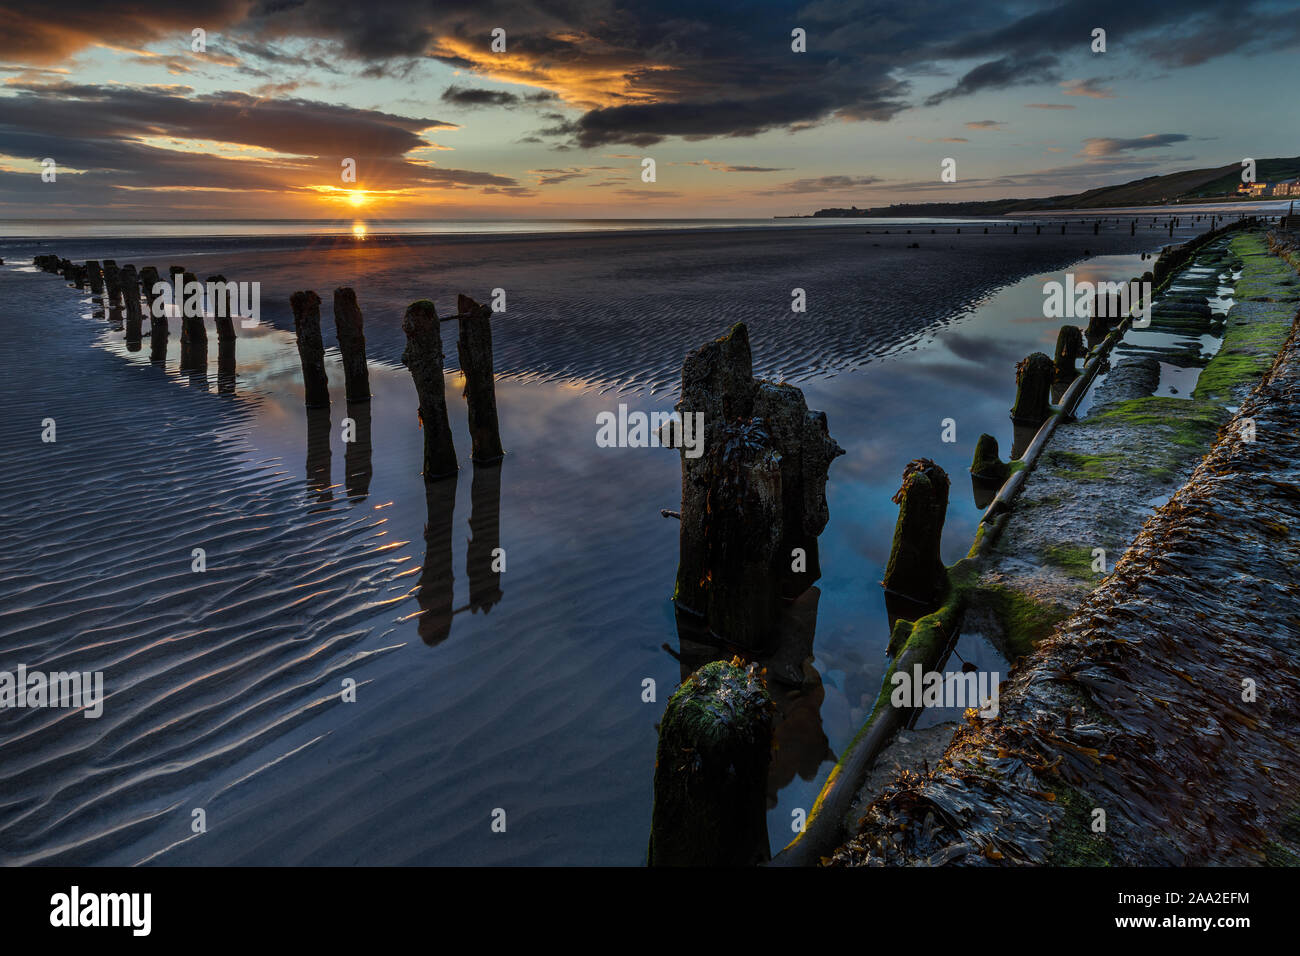 Early morning view, with remains of groynes, on the beach at the seaside village of Sandsend, near Whitby North Yorkshire England UK Stock Photo